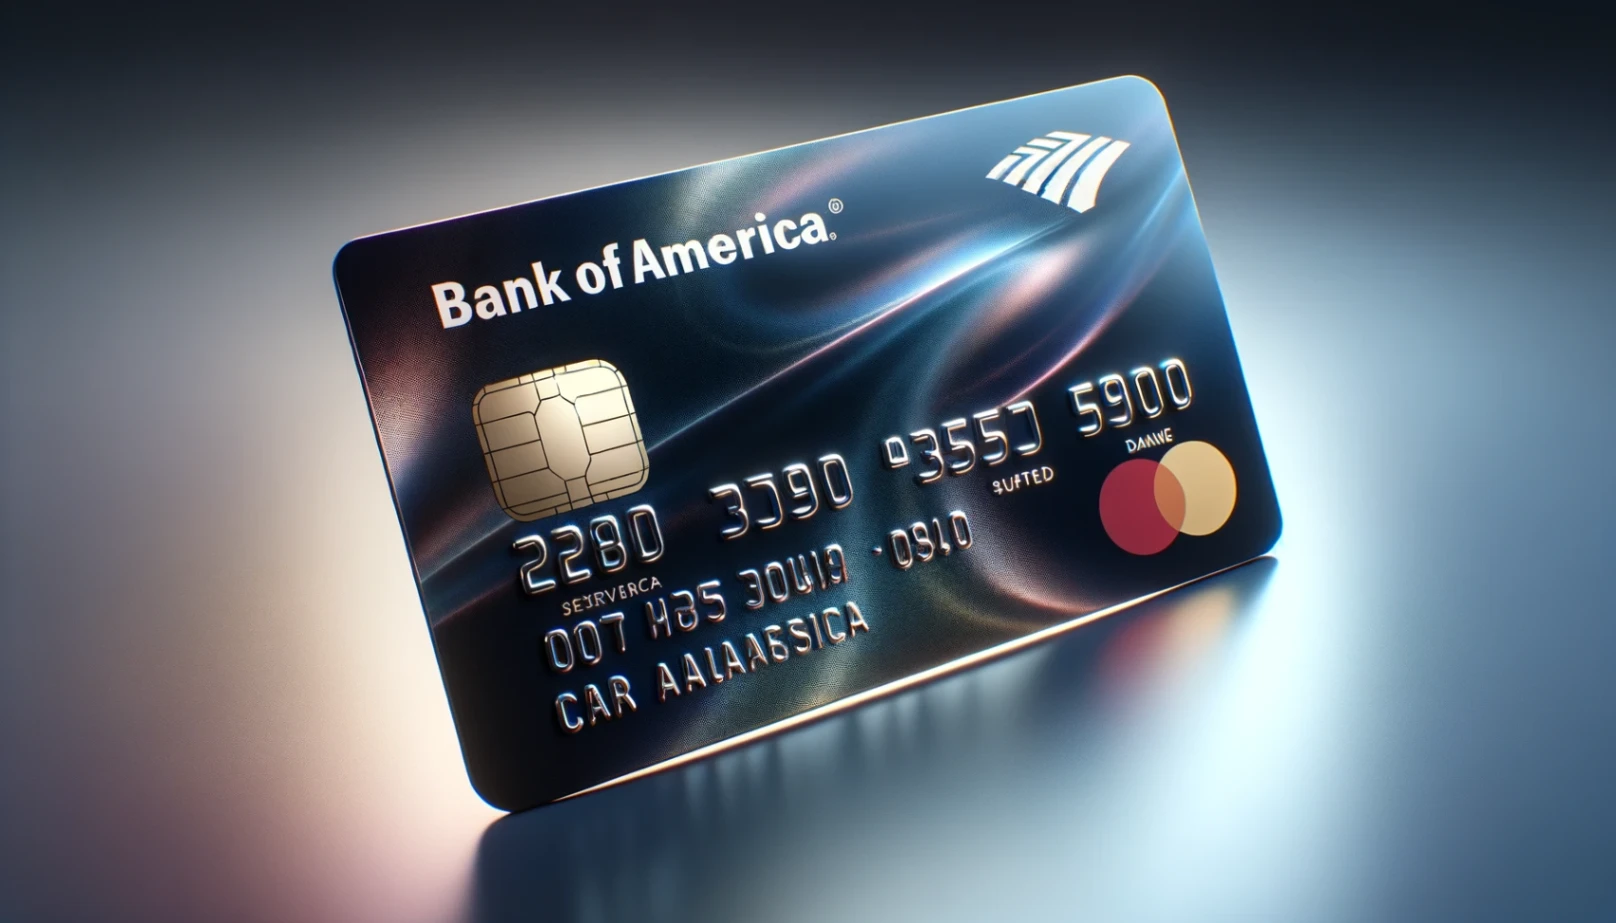 Bank of America Cash Rewards Credit Card - Learn How to Apply